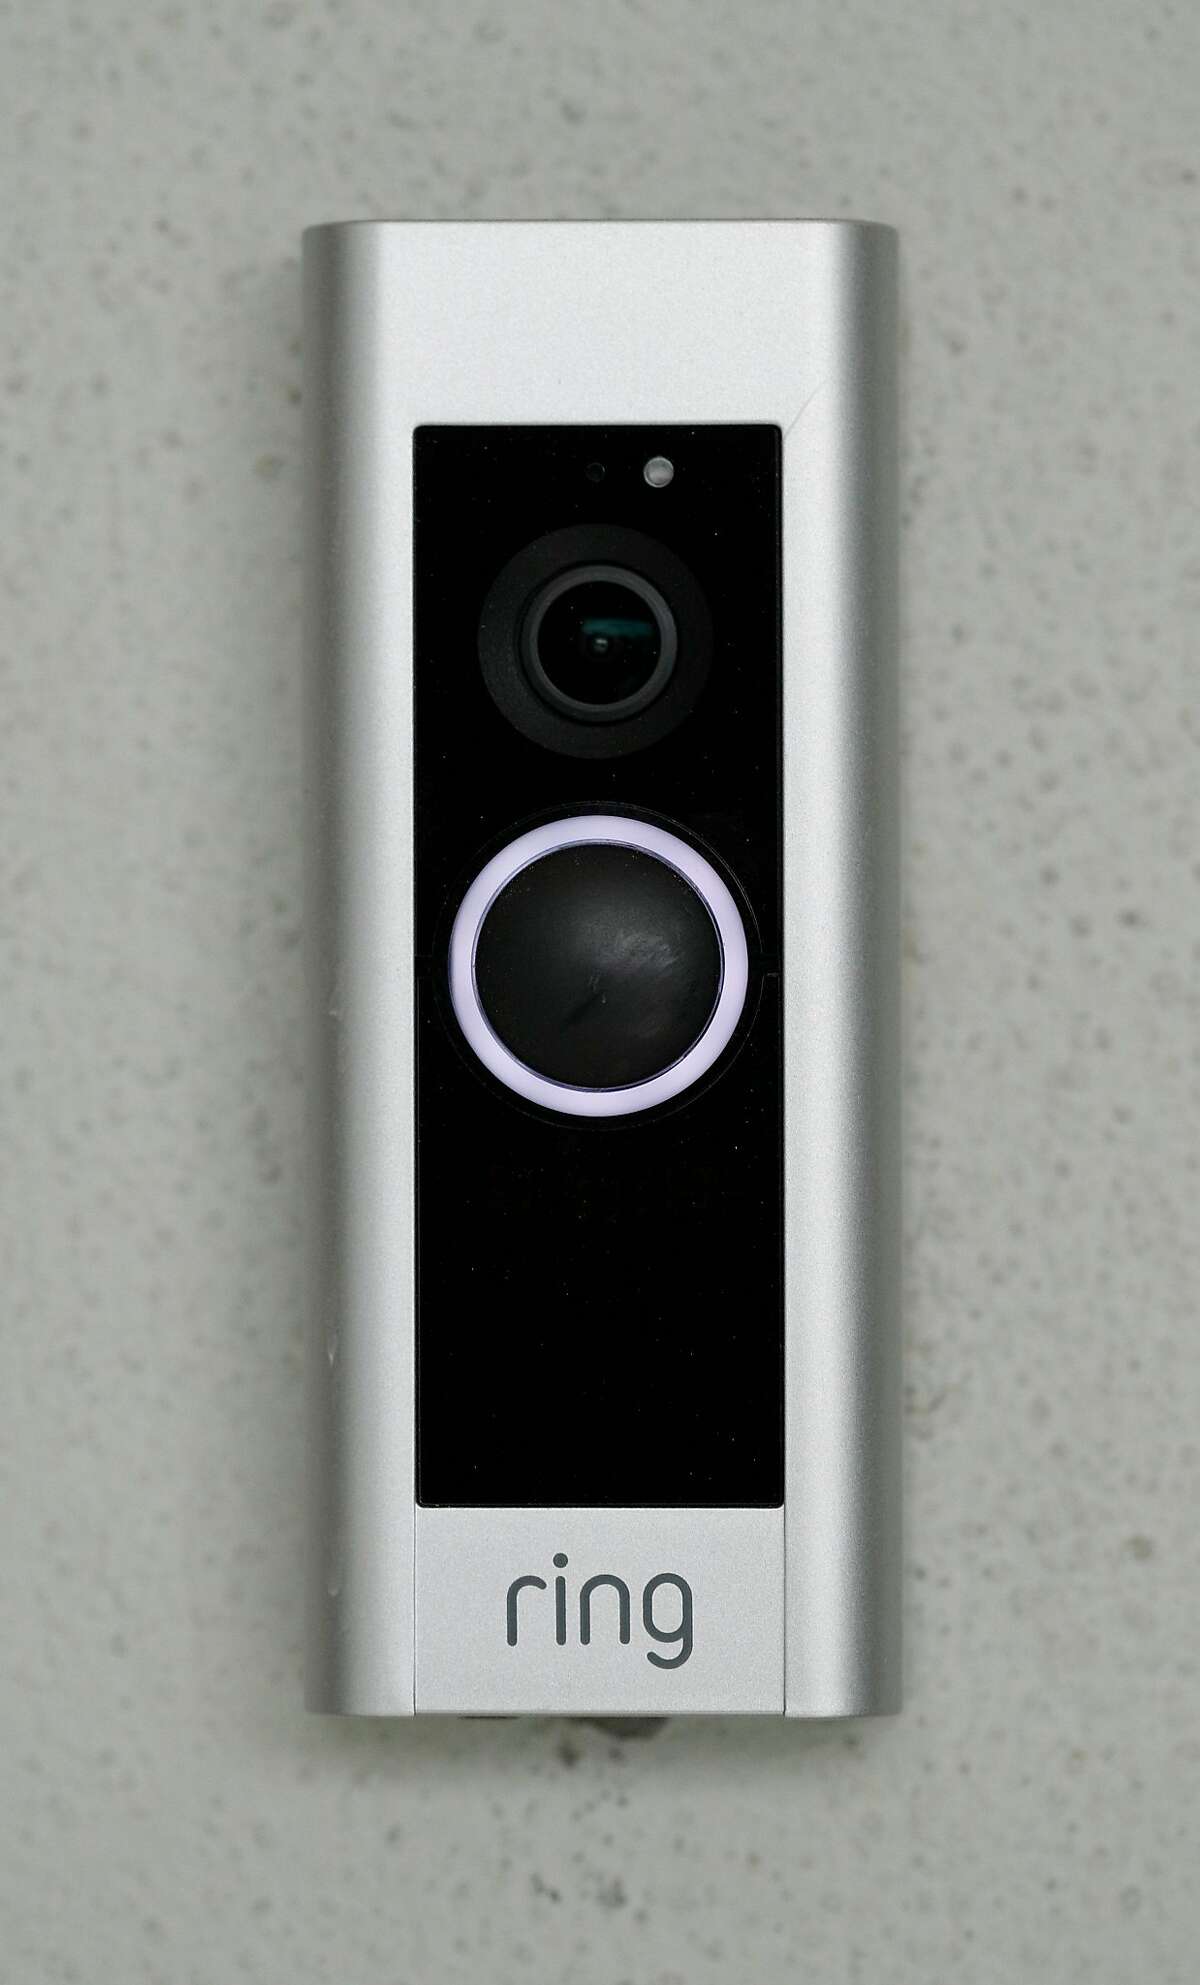 Ring  The now wildly popular doorbell cameras help nab porch pirates and burglars. Police agencies, including the Houston Police Department, have partnered with the company since its inception in 2011. The sharks on Shark Tank actually rejected inventor Jamie Siminoff's idea when he first appeared on the show. 